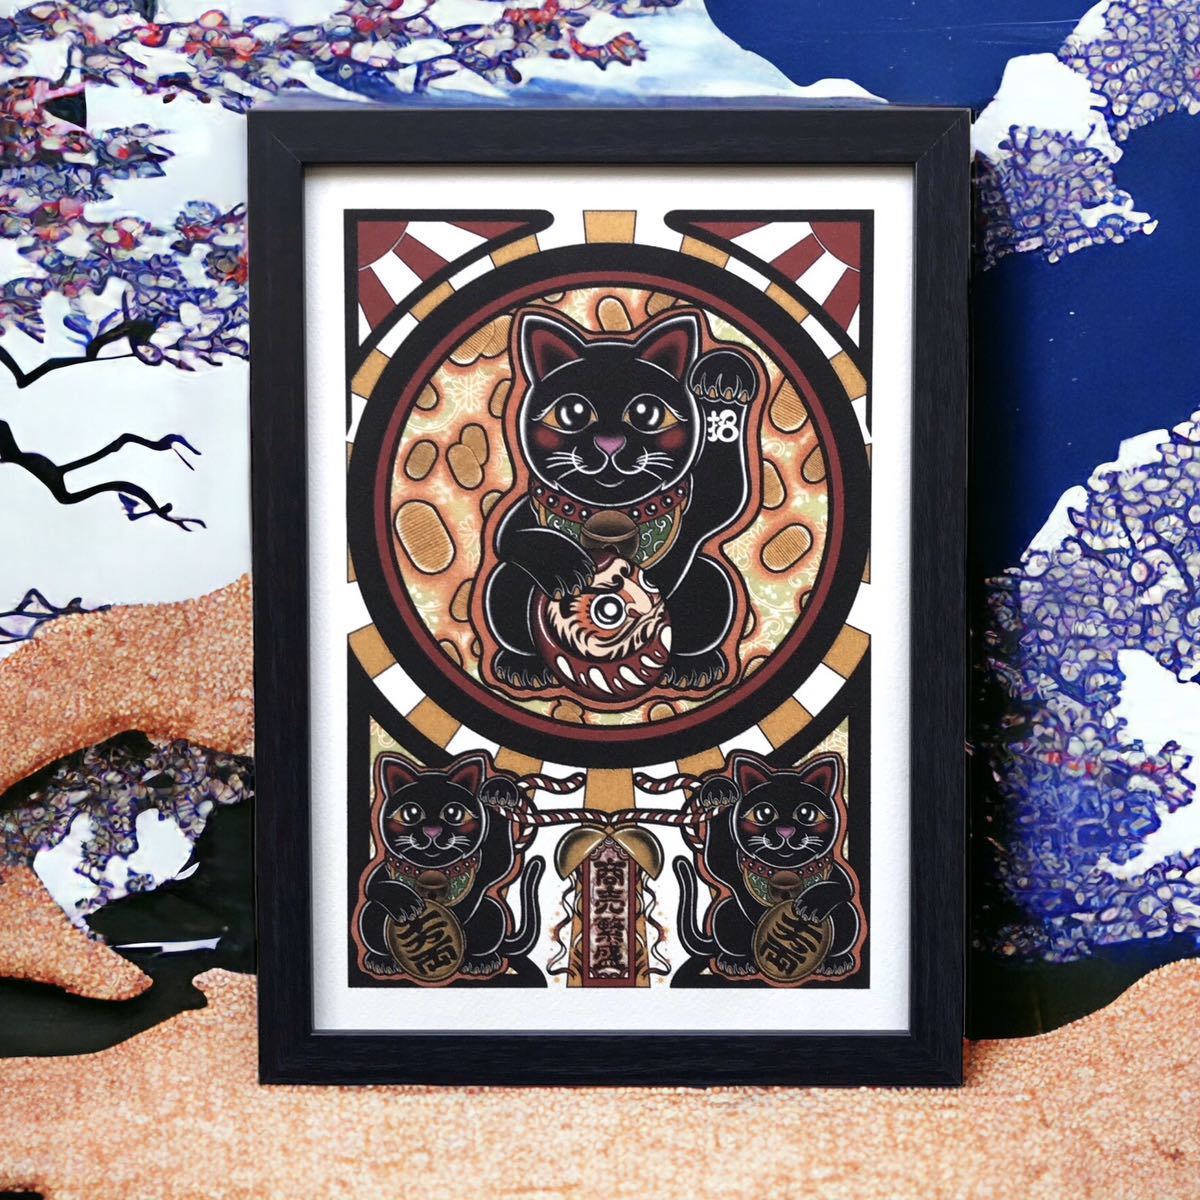 Lucky charm, good luck, good fortune, increase your fortune, left hand, cute, beckoning cat, black cat, red, Daruma, prosperous business, art poster, A4 size, black, with frame, Handmade items, interior, miscellaneous goods, ornament, object